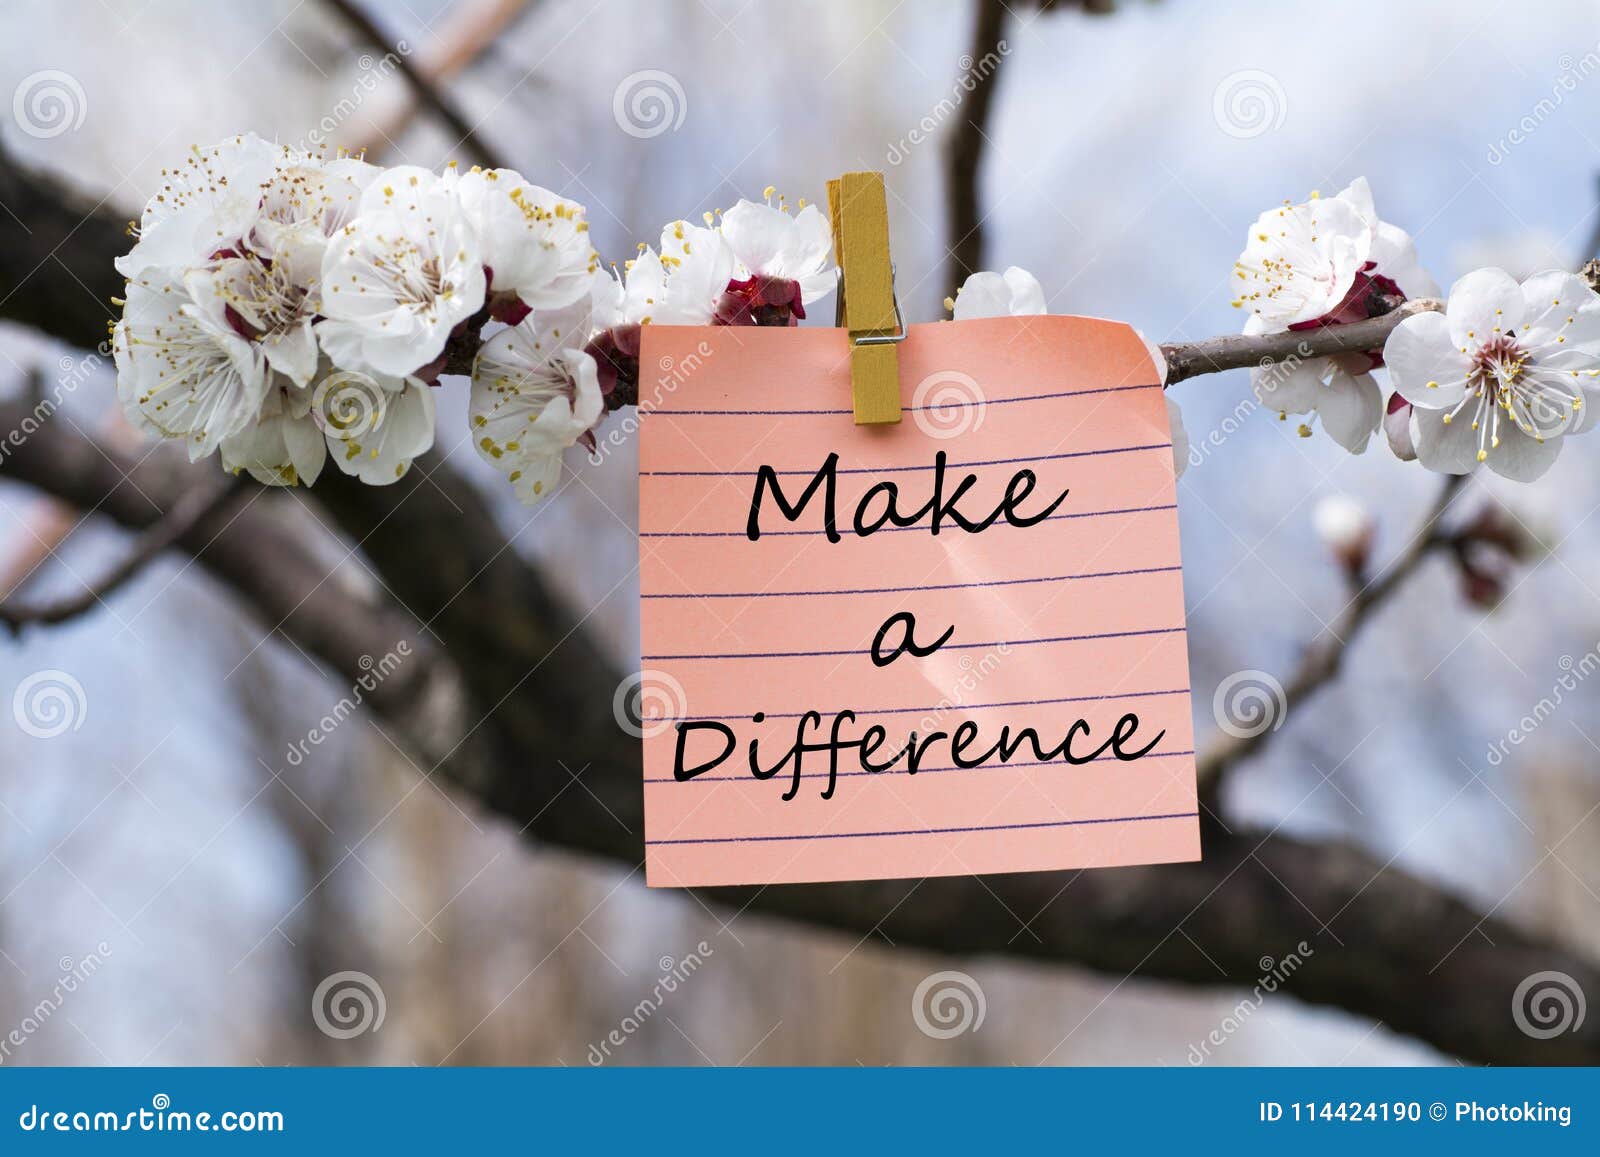 make a difference in memo